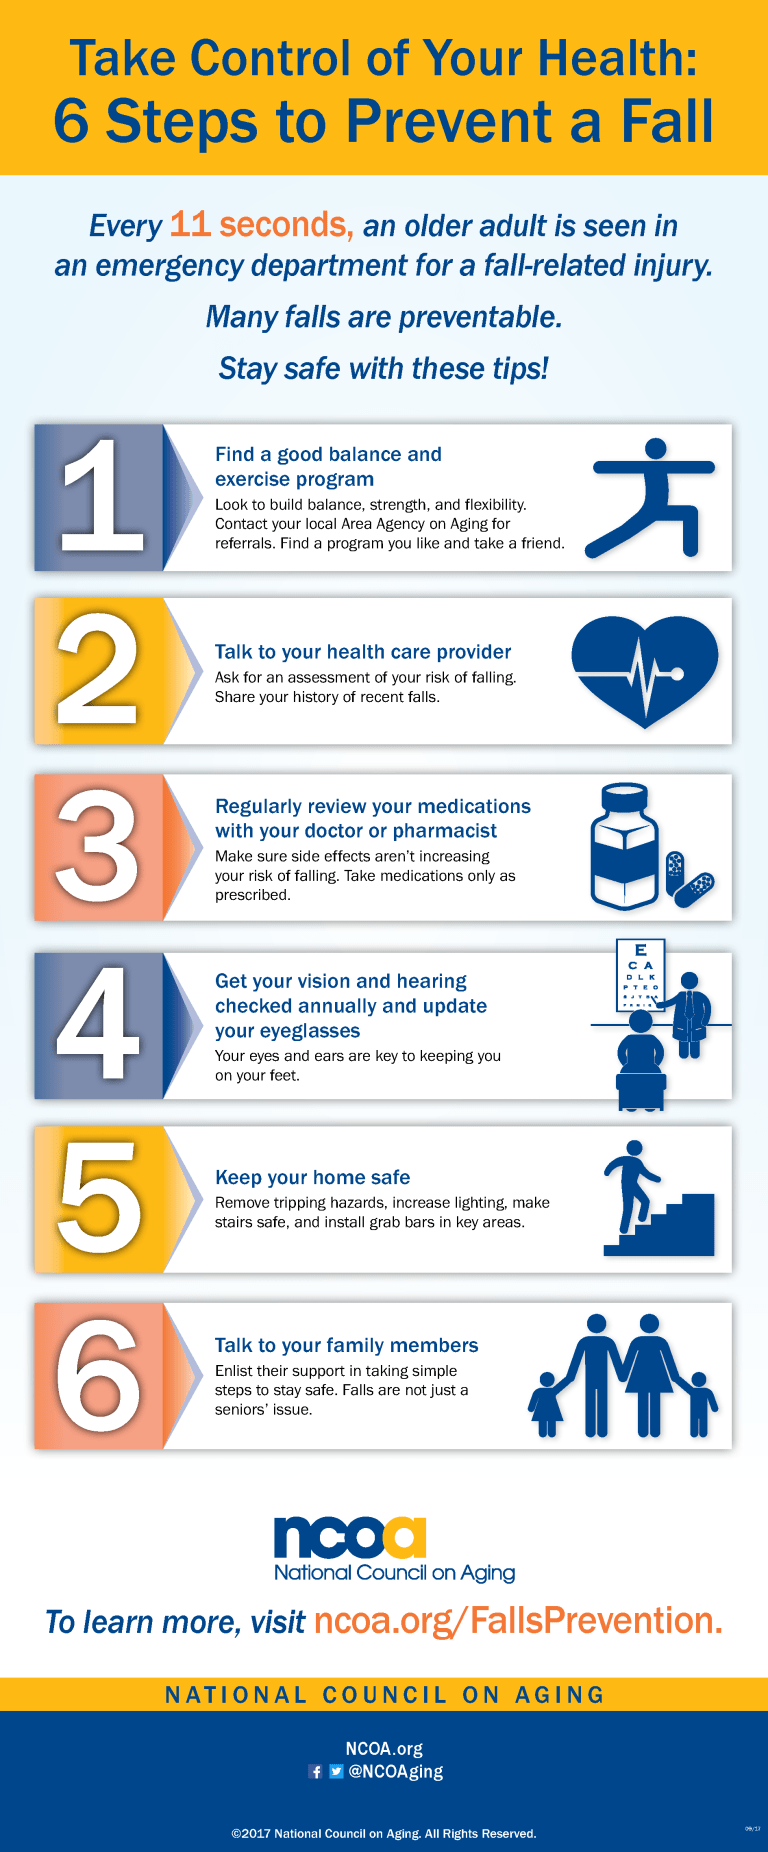 Take Control of Your Health: 6 Steps to Prevent a Fall infographic explaining the different steps a person can take to prevent their fall risk.